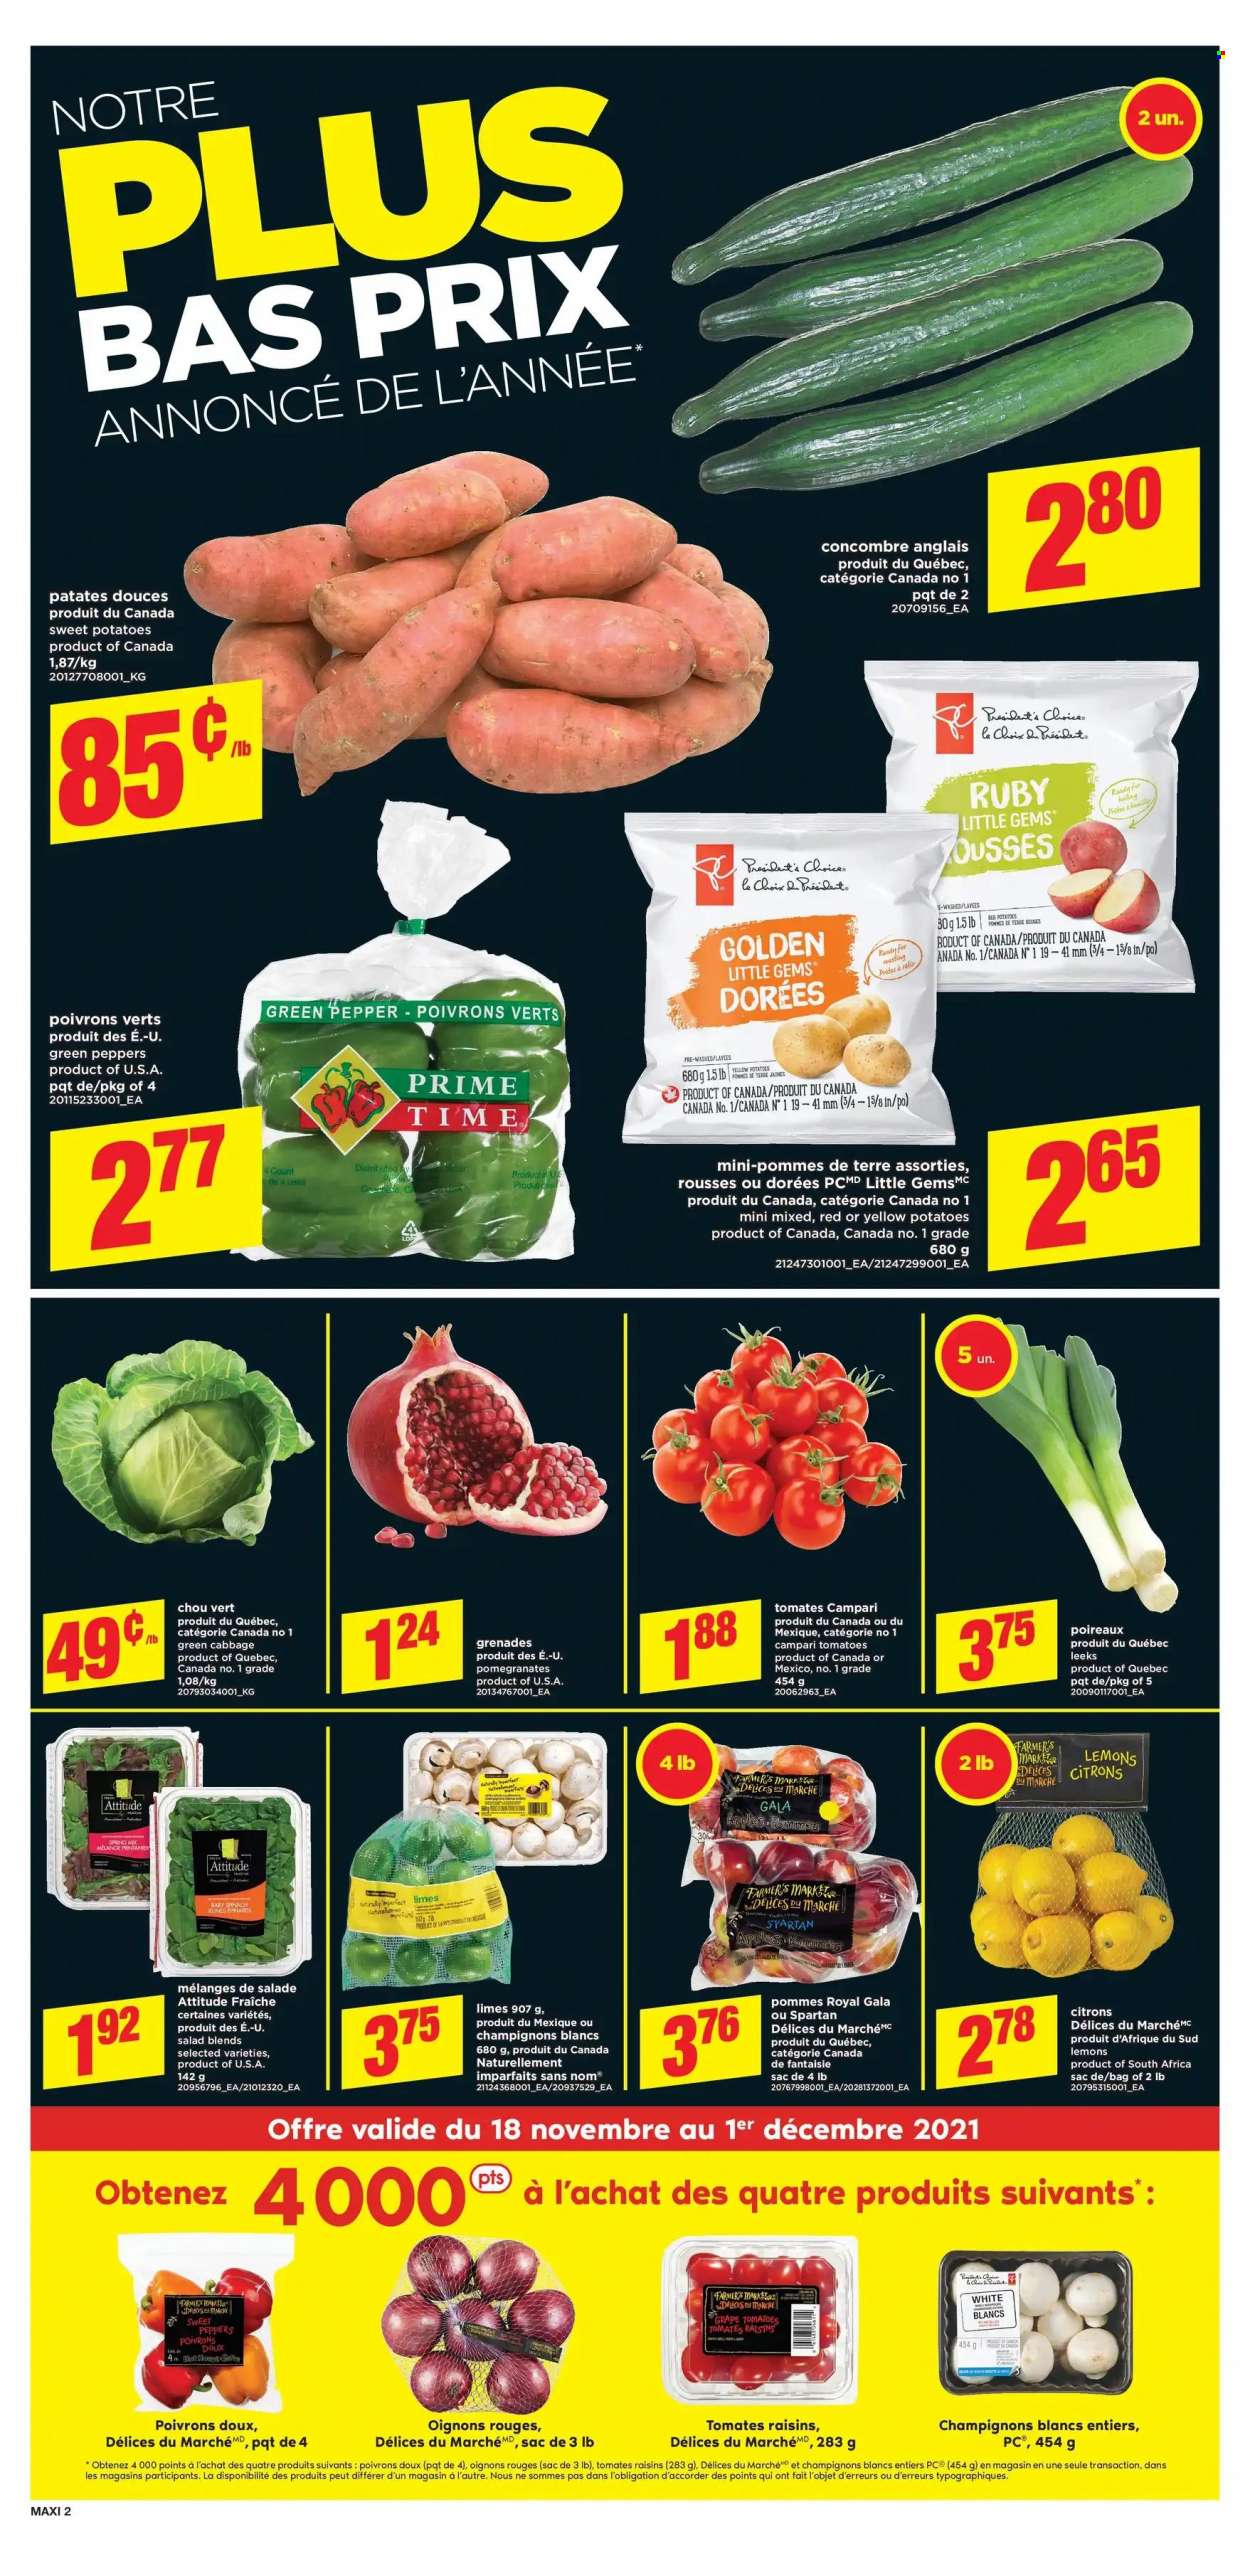 thumbnail - Maxi & Cie Flyer - November 18, 2021 - November 24, 2021 - Sales products - cabbage, spinach, sweet peppers, sweet potato, tomatoes, potatoes, salad, peppers, green pepper, Gala, limes, pomegranate, lemons, dried fruit, raisins. Page 3.